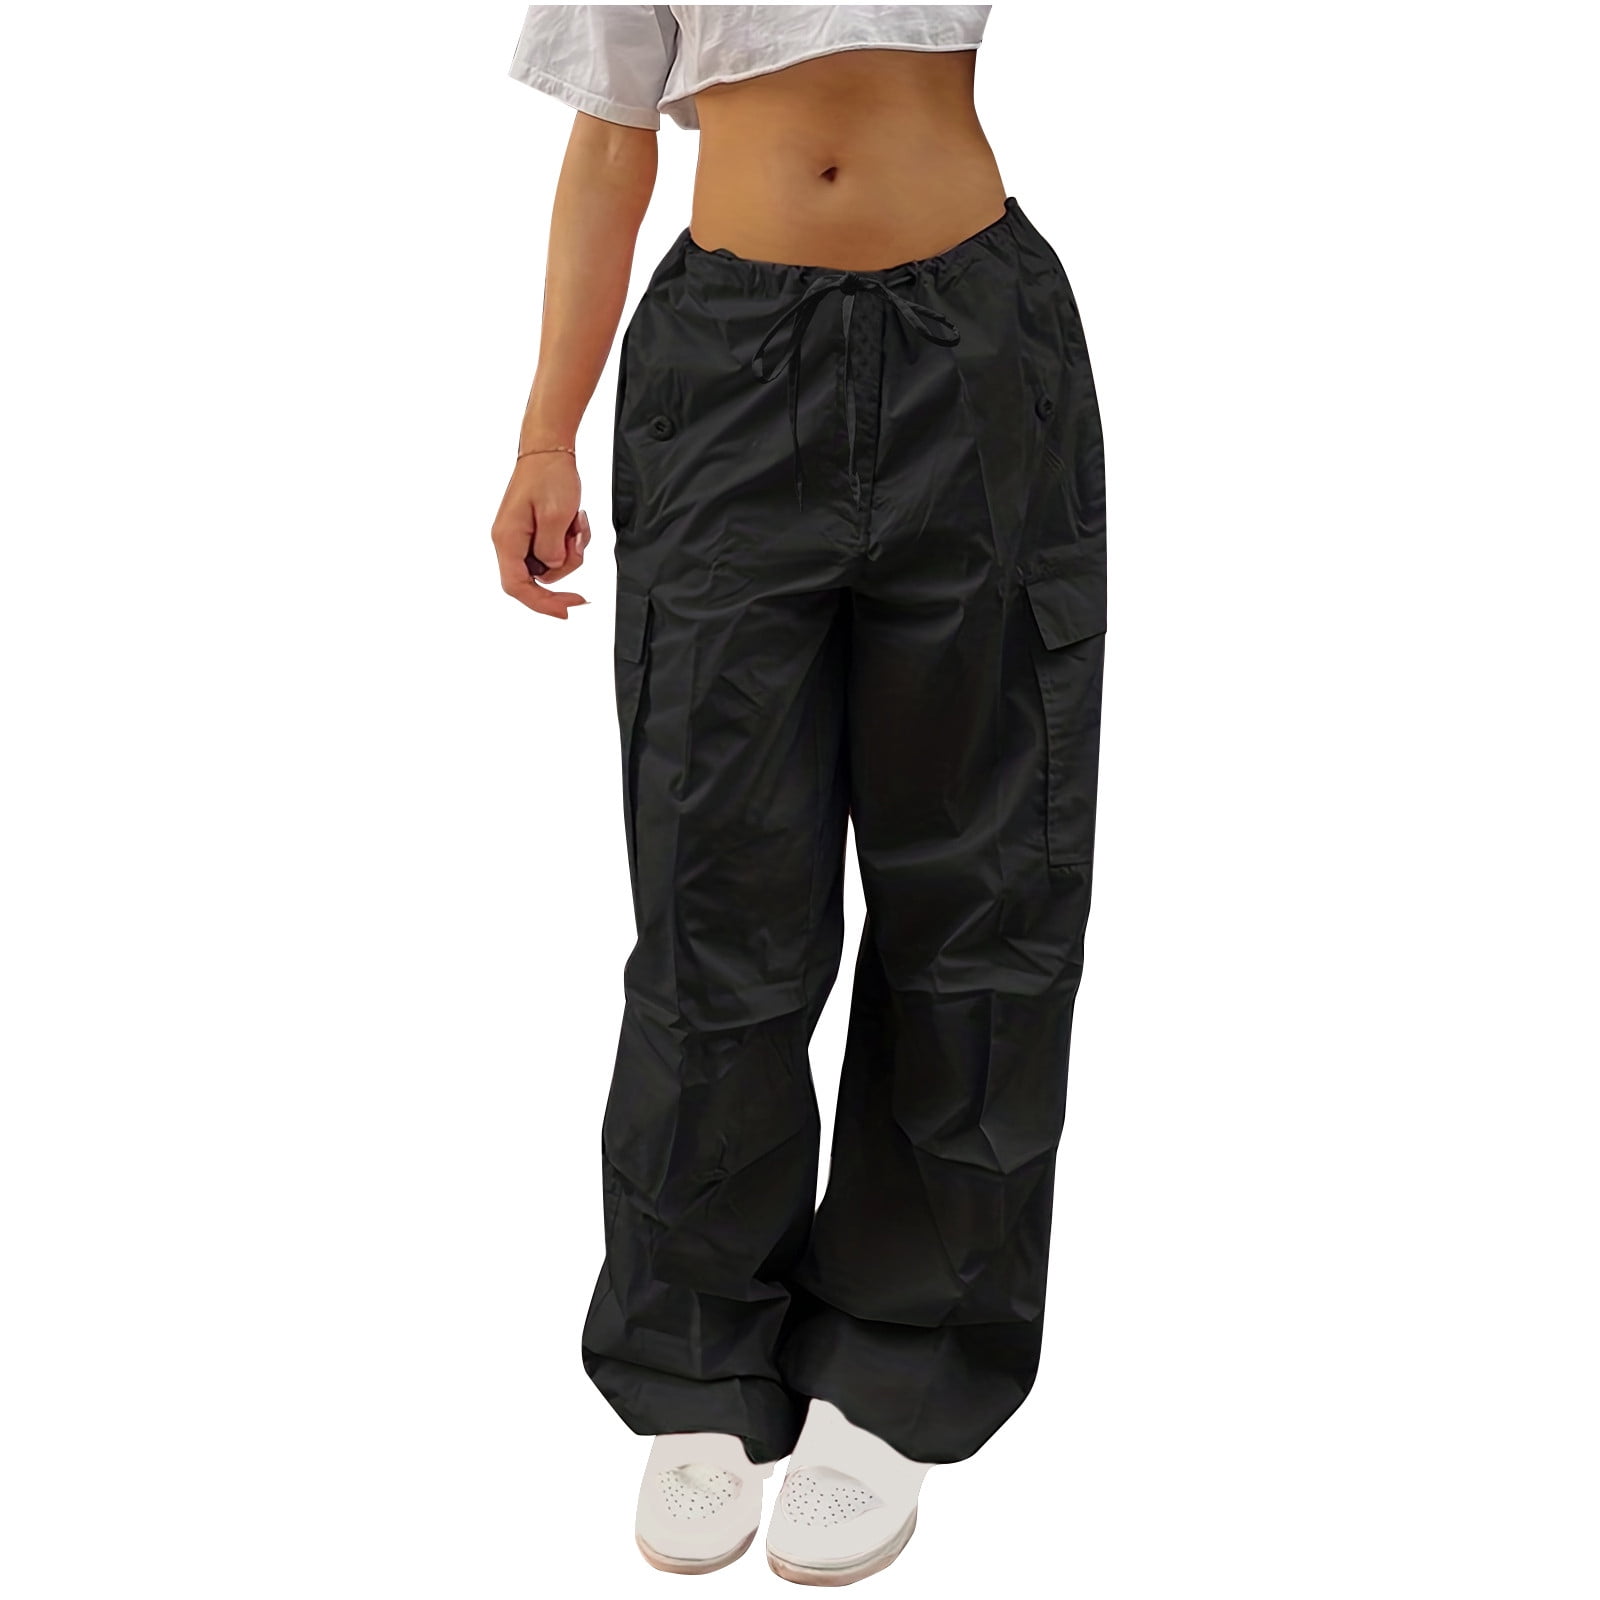 SMihono Young Girls Full Length Trousers Women's Cargo Pants Lightweight  Joggers Pants With Elastic Waist Outdoor Hiking Athletic Casual Pants Wine  8 